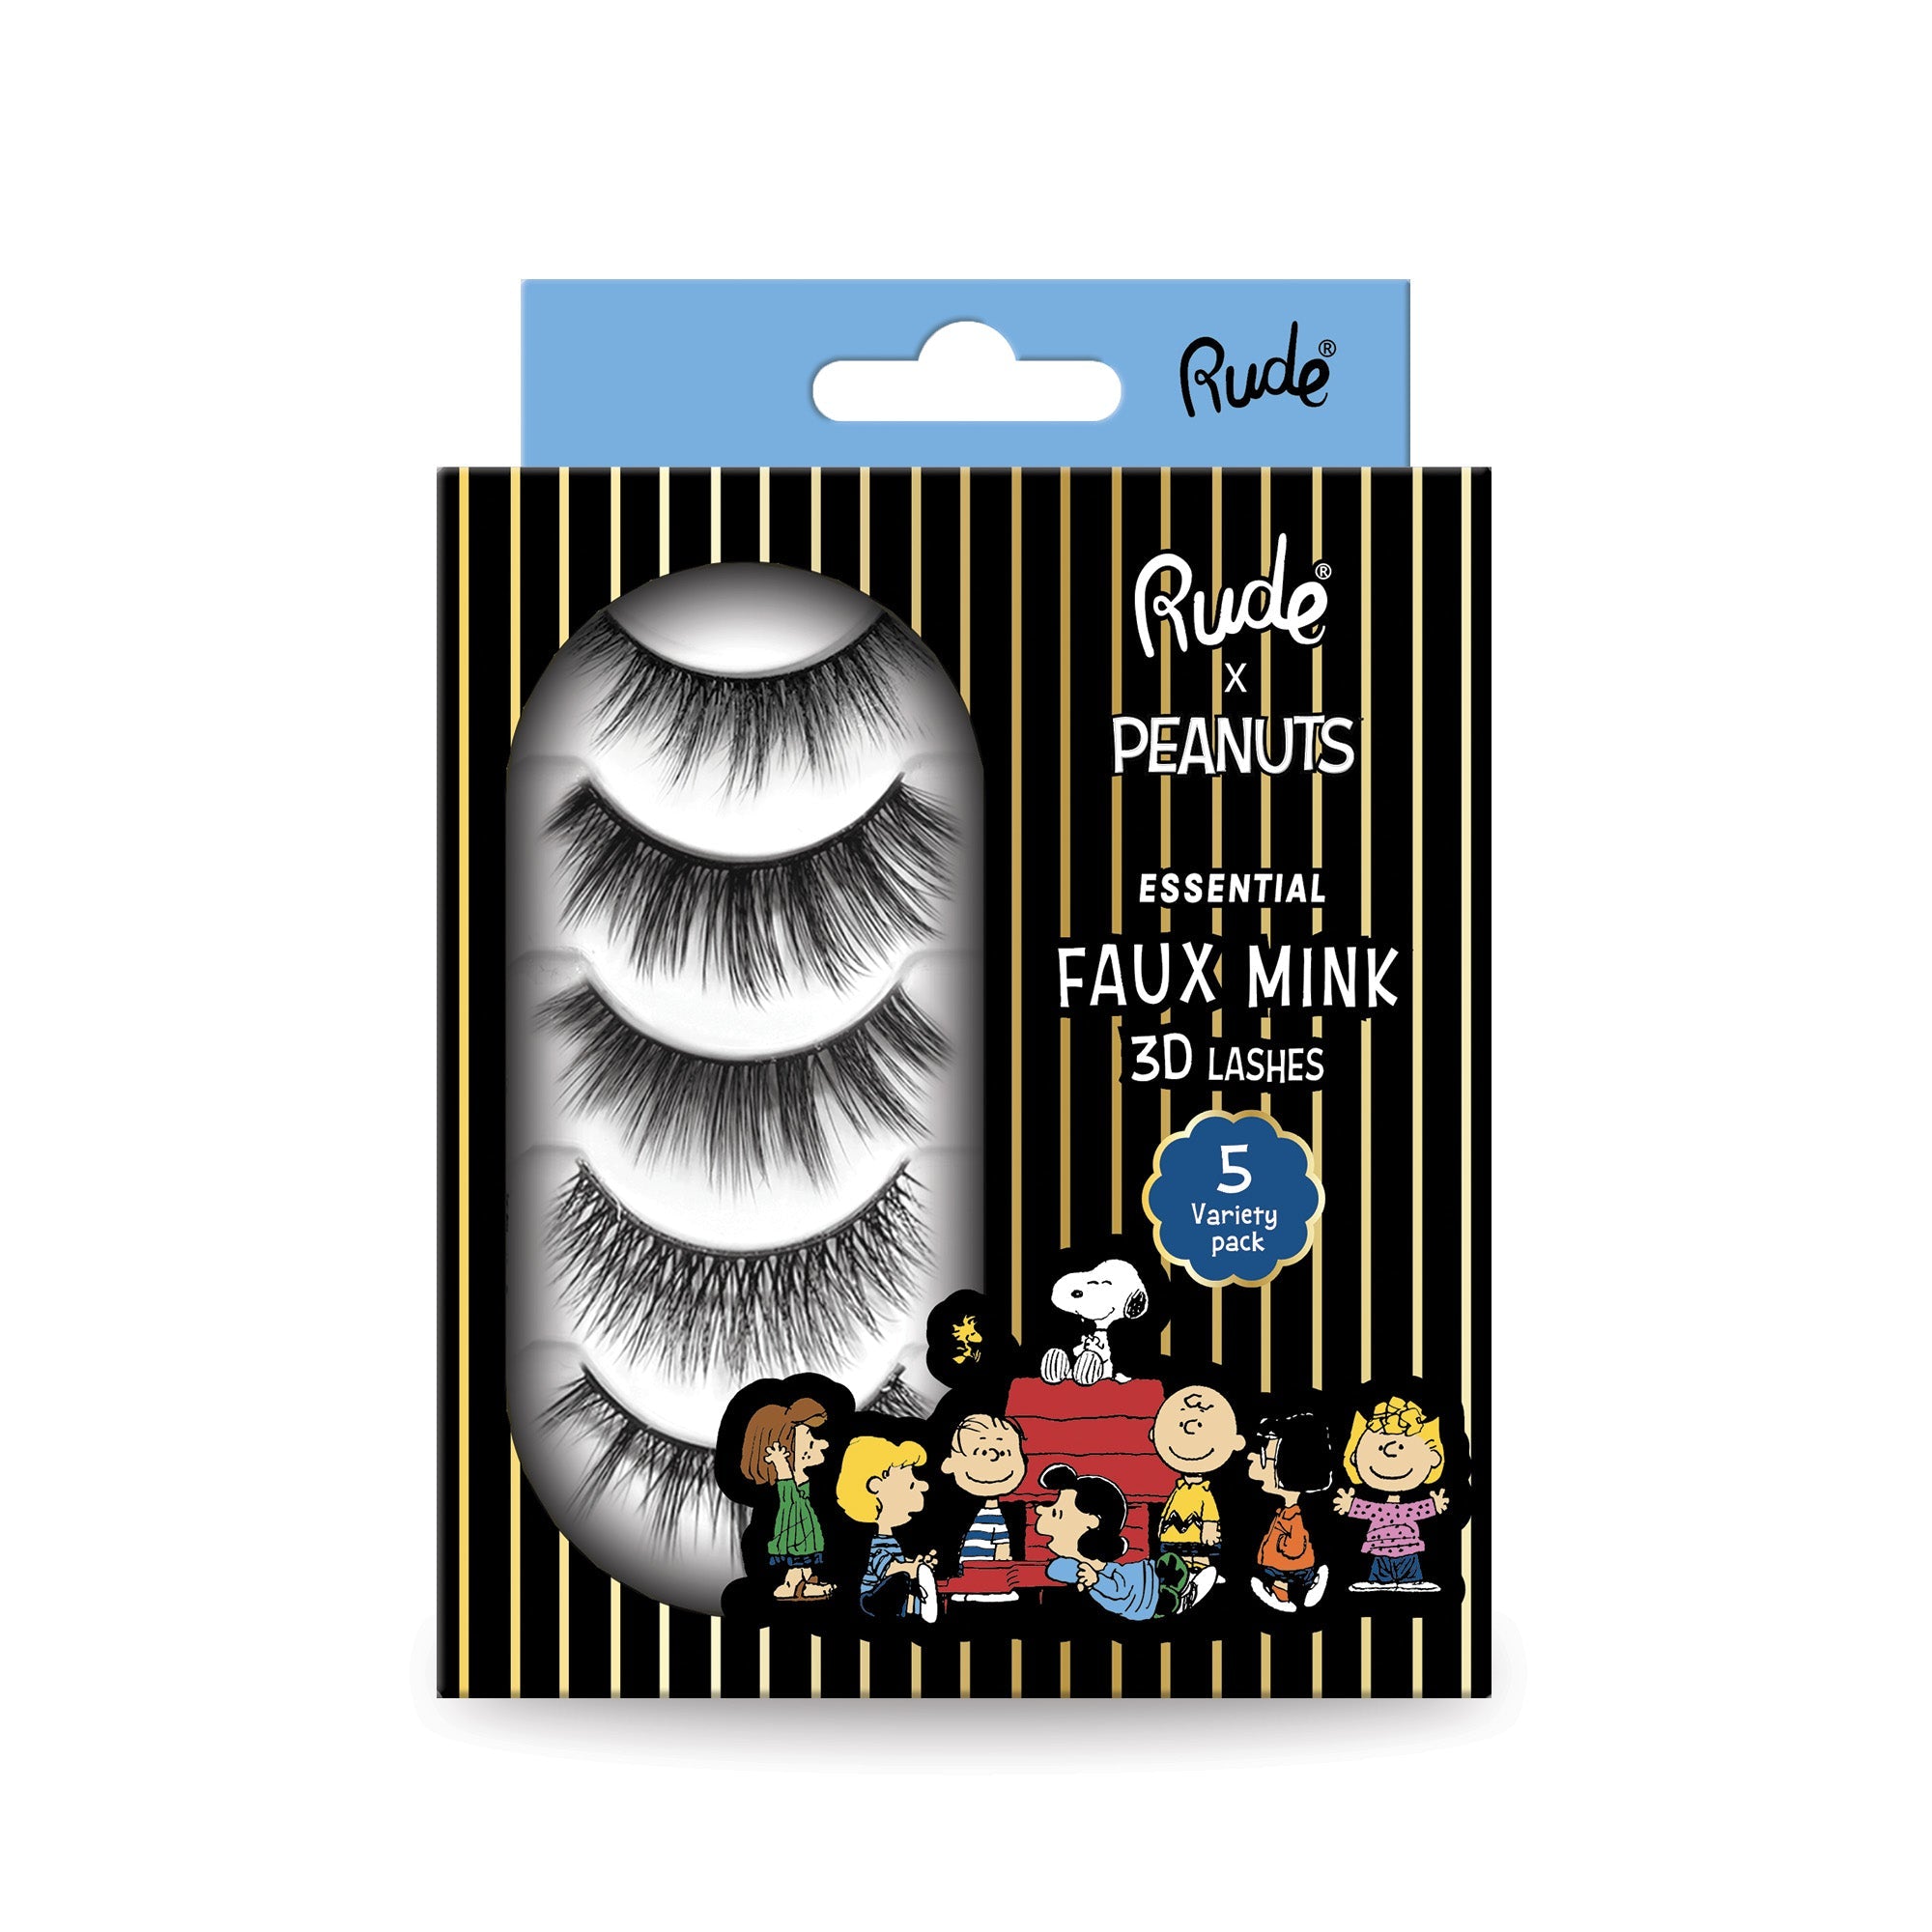 RUDE Peanuts Essential Faux Mink 3D Lashes - 5-pack